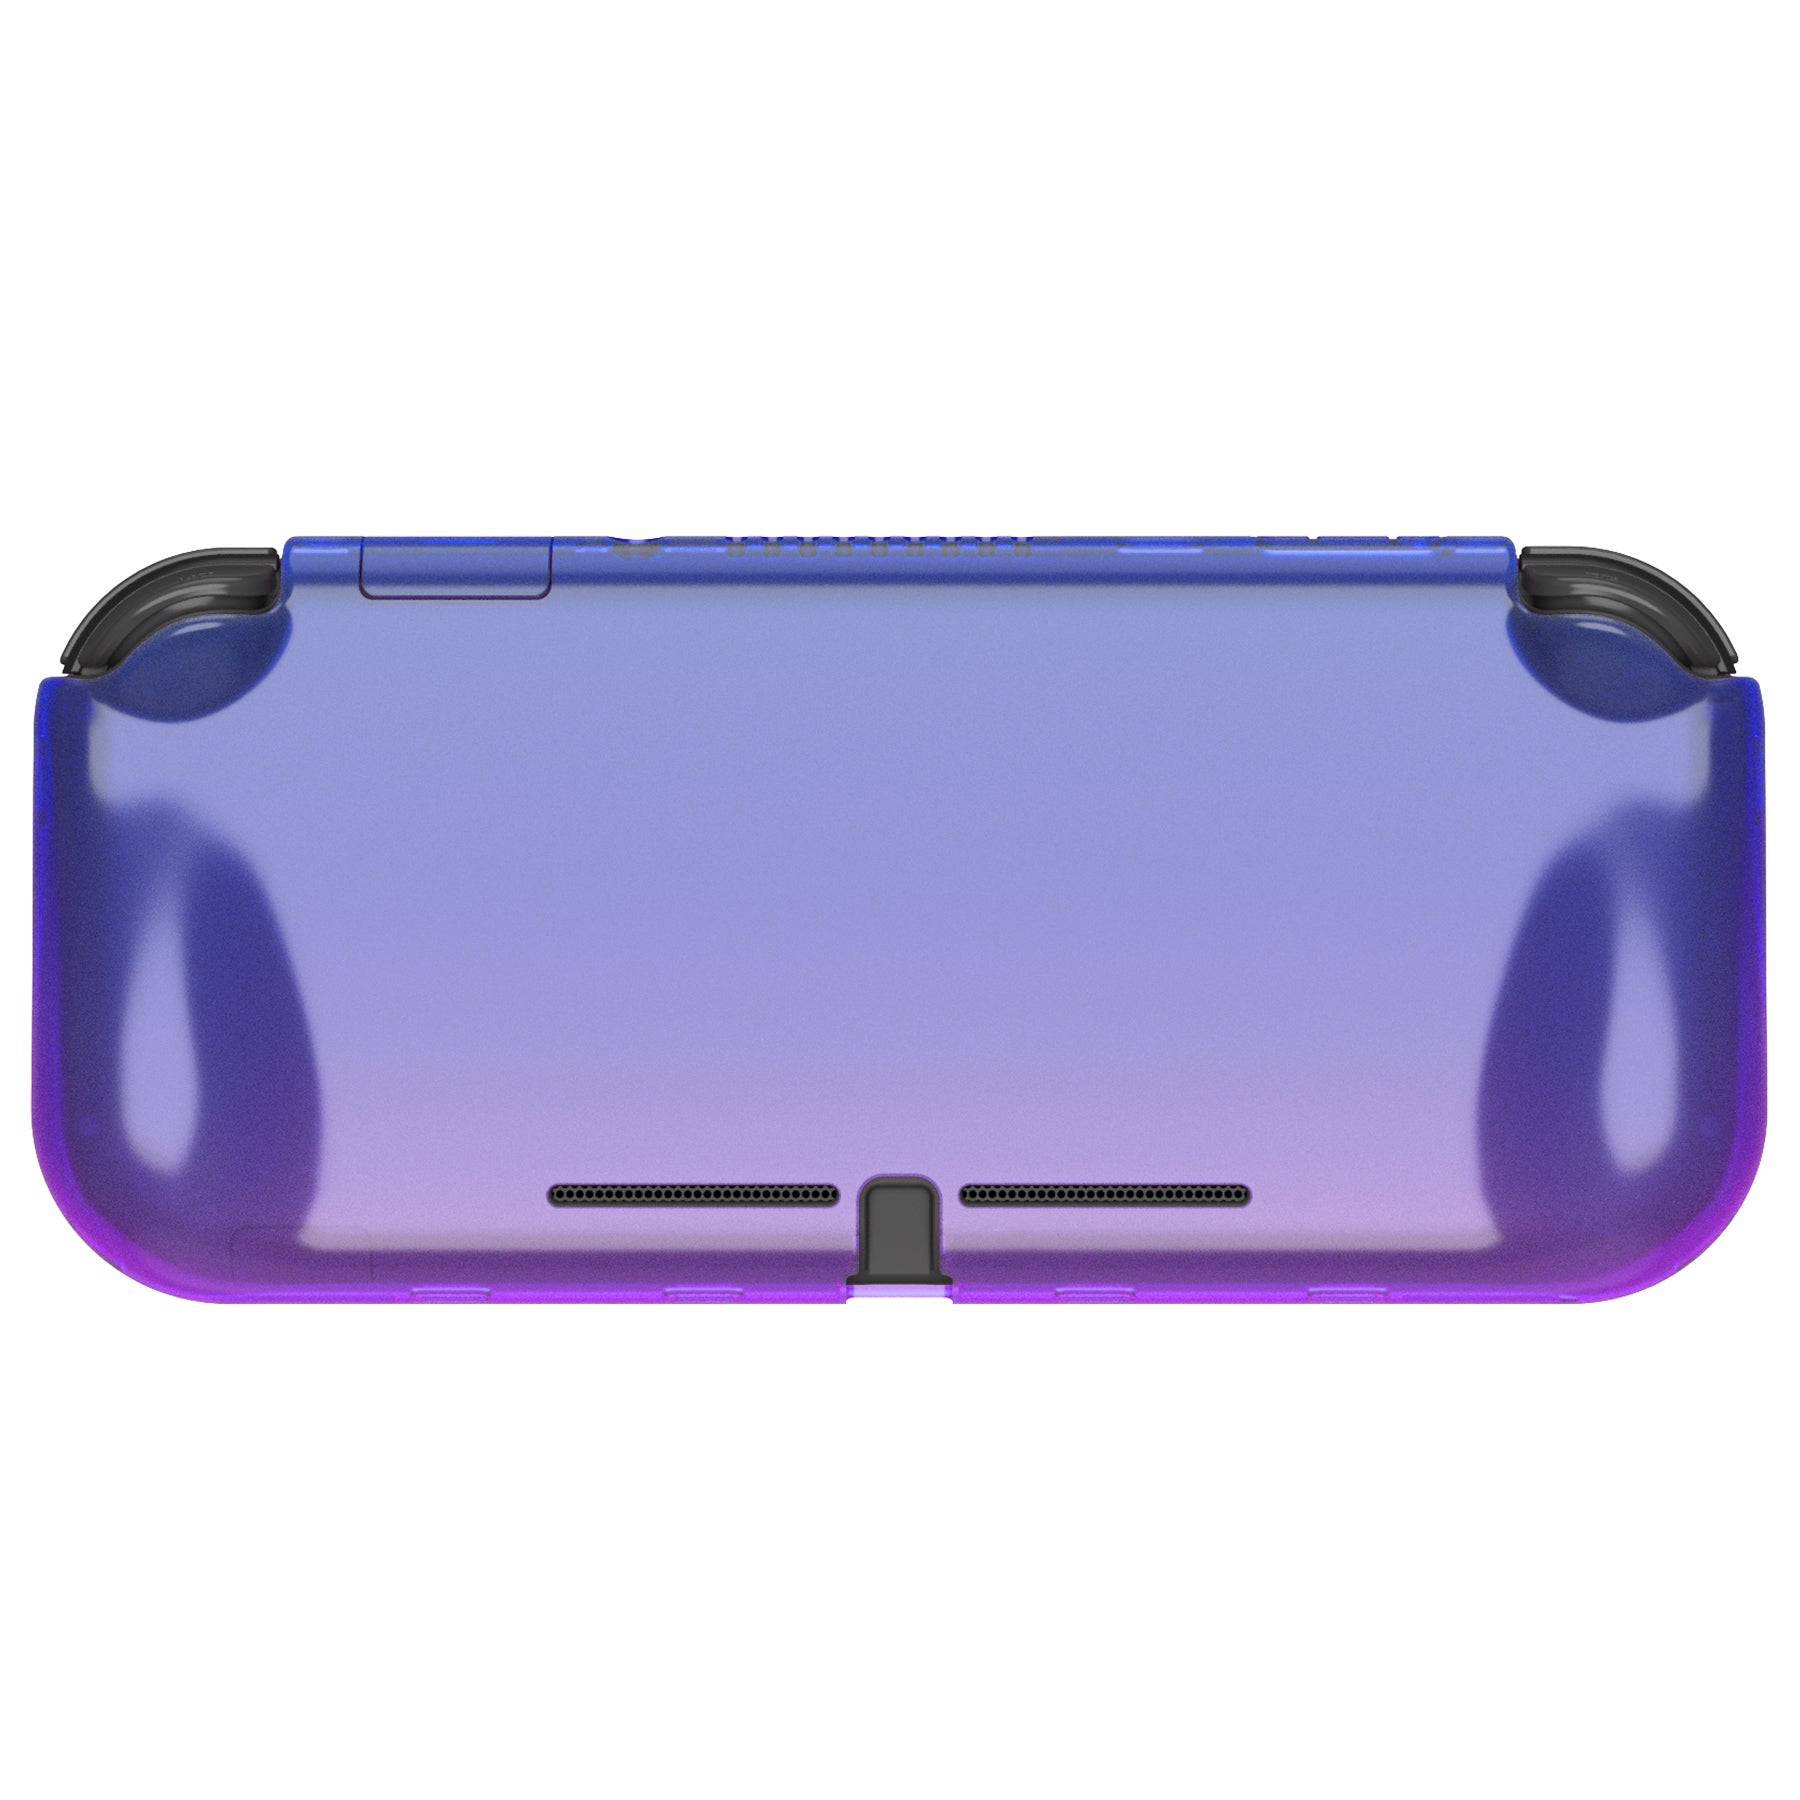 PlayVital ZealProtect Protective Case for Nintendo Switch Lite, Hard Shell Ergonomic Grip Cover for Nintendo Switch Lite w/Screen Protector & Thumb Grip Caps & Button Caps - Gradient Translucent Bluebell - PSLYP3011 playvital